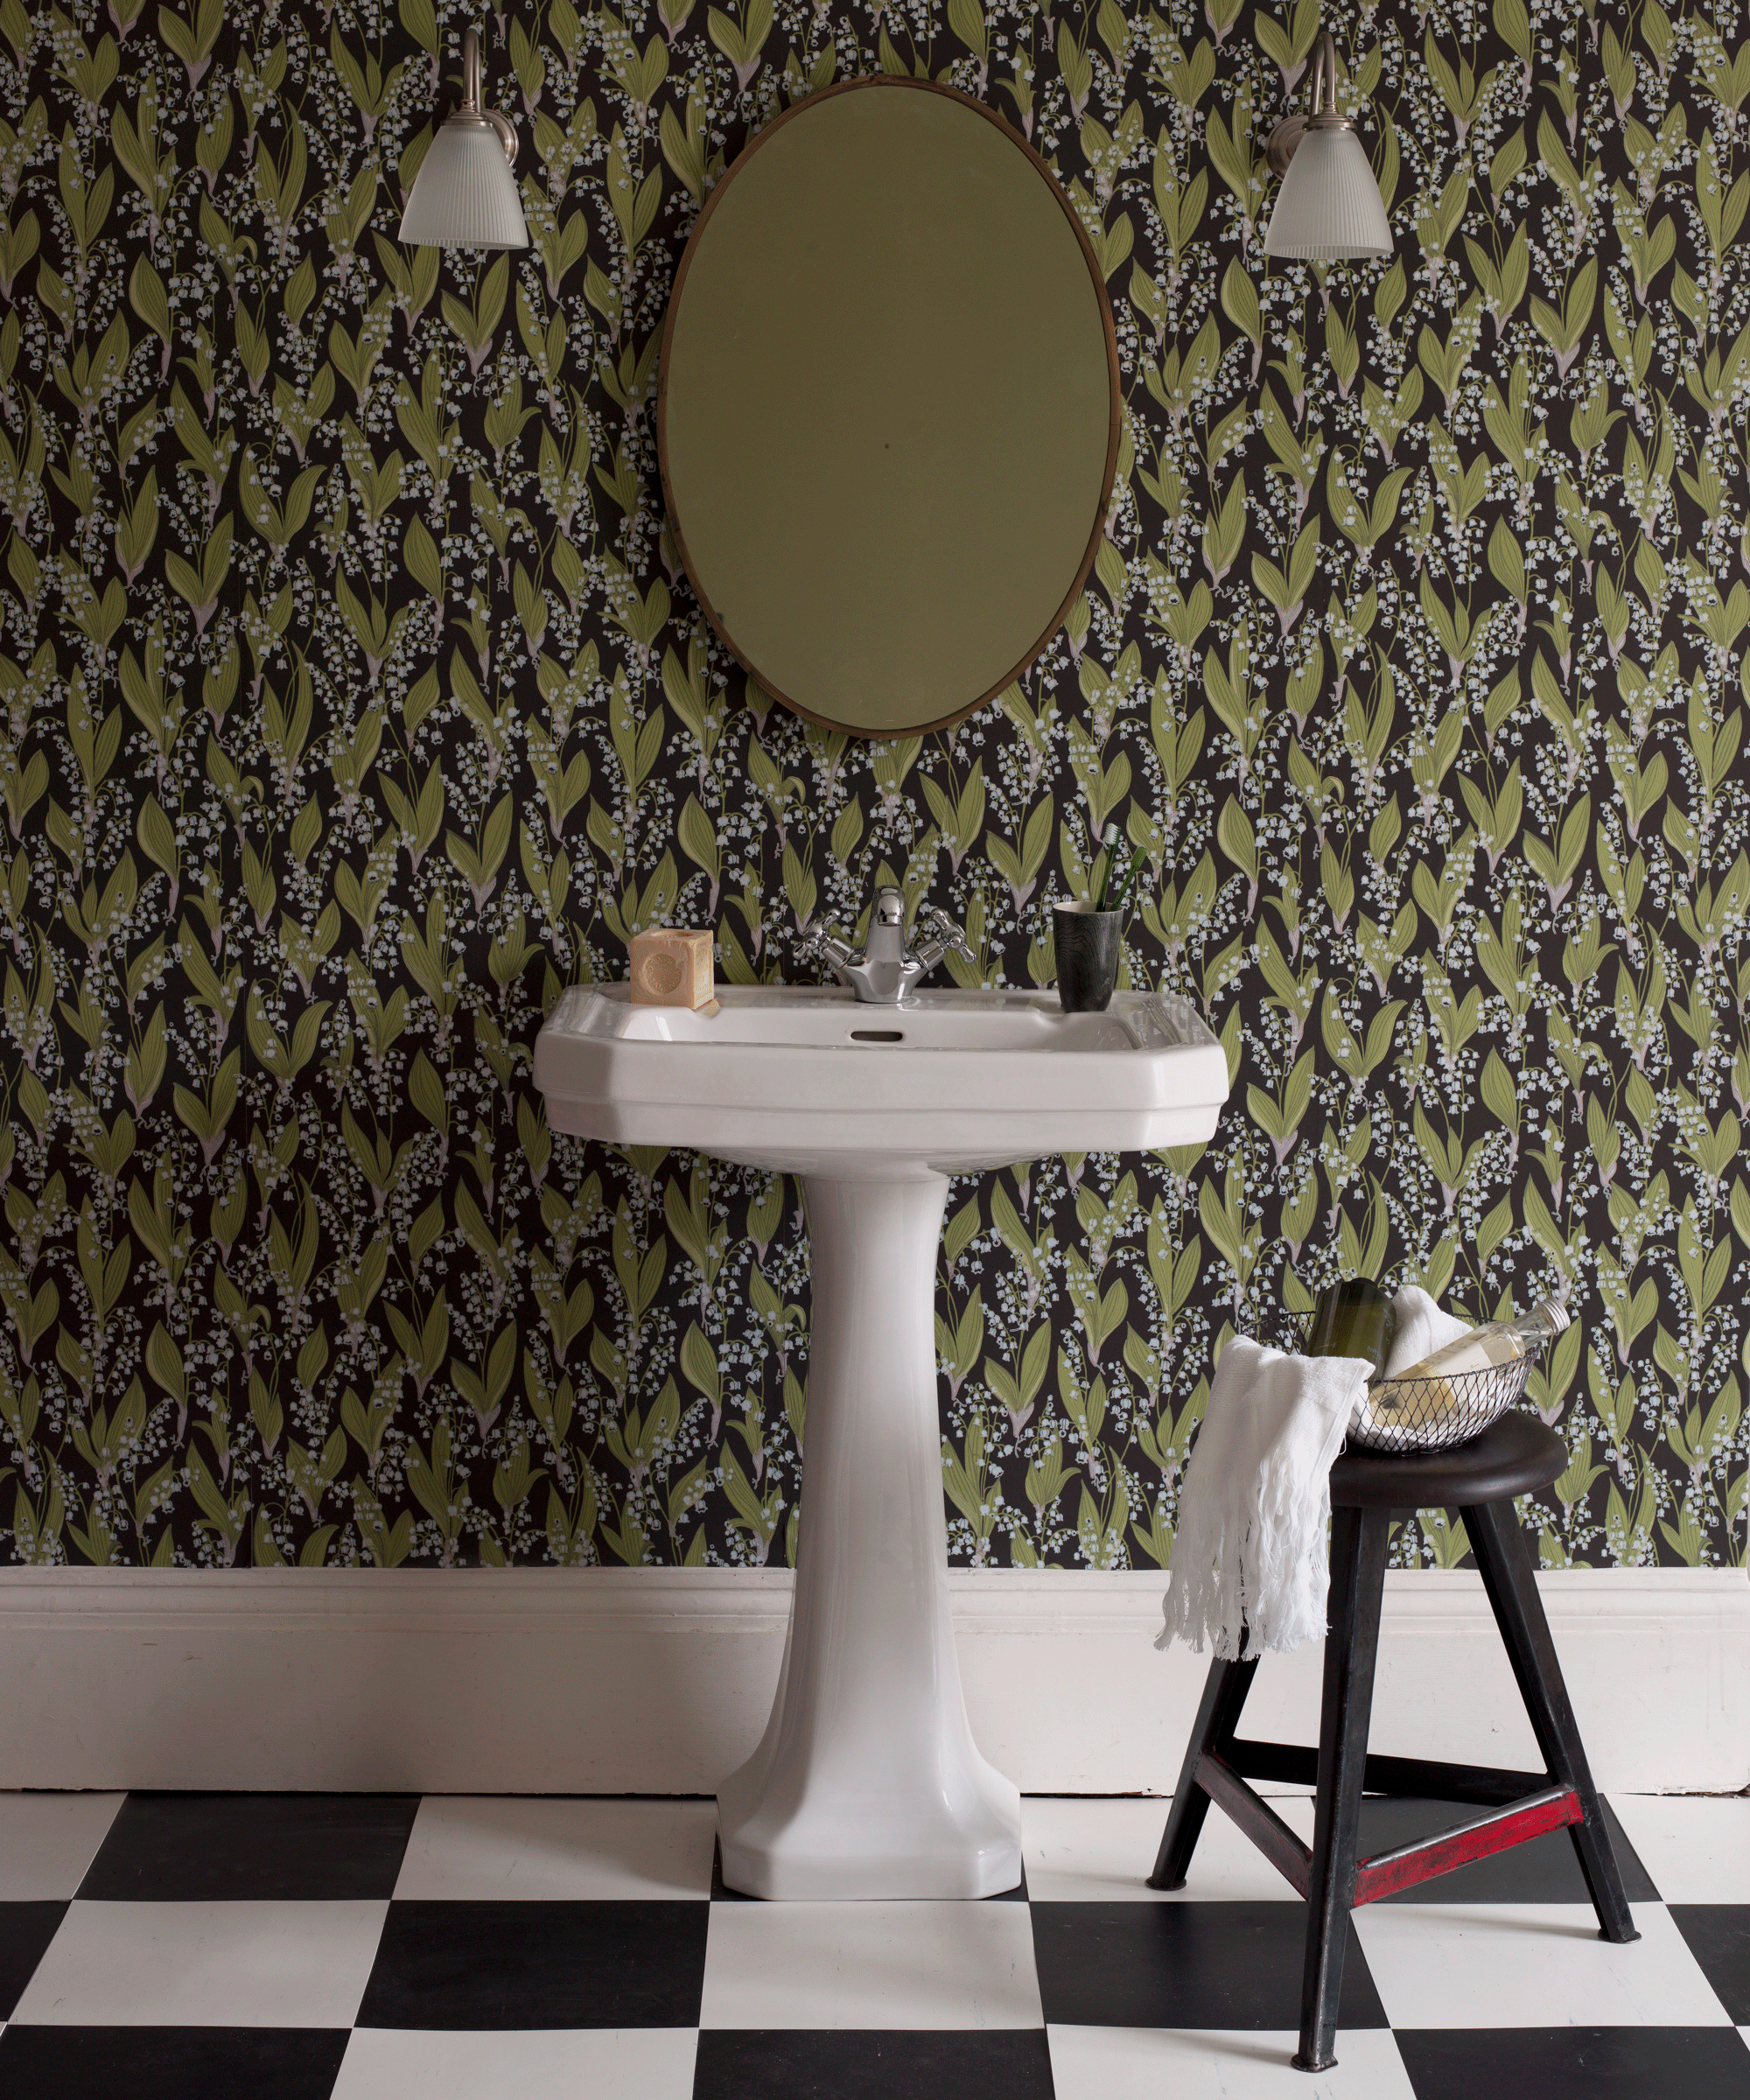 Bathroom with monochrome vinyl flooring and patterned wallpaper